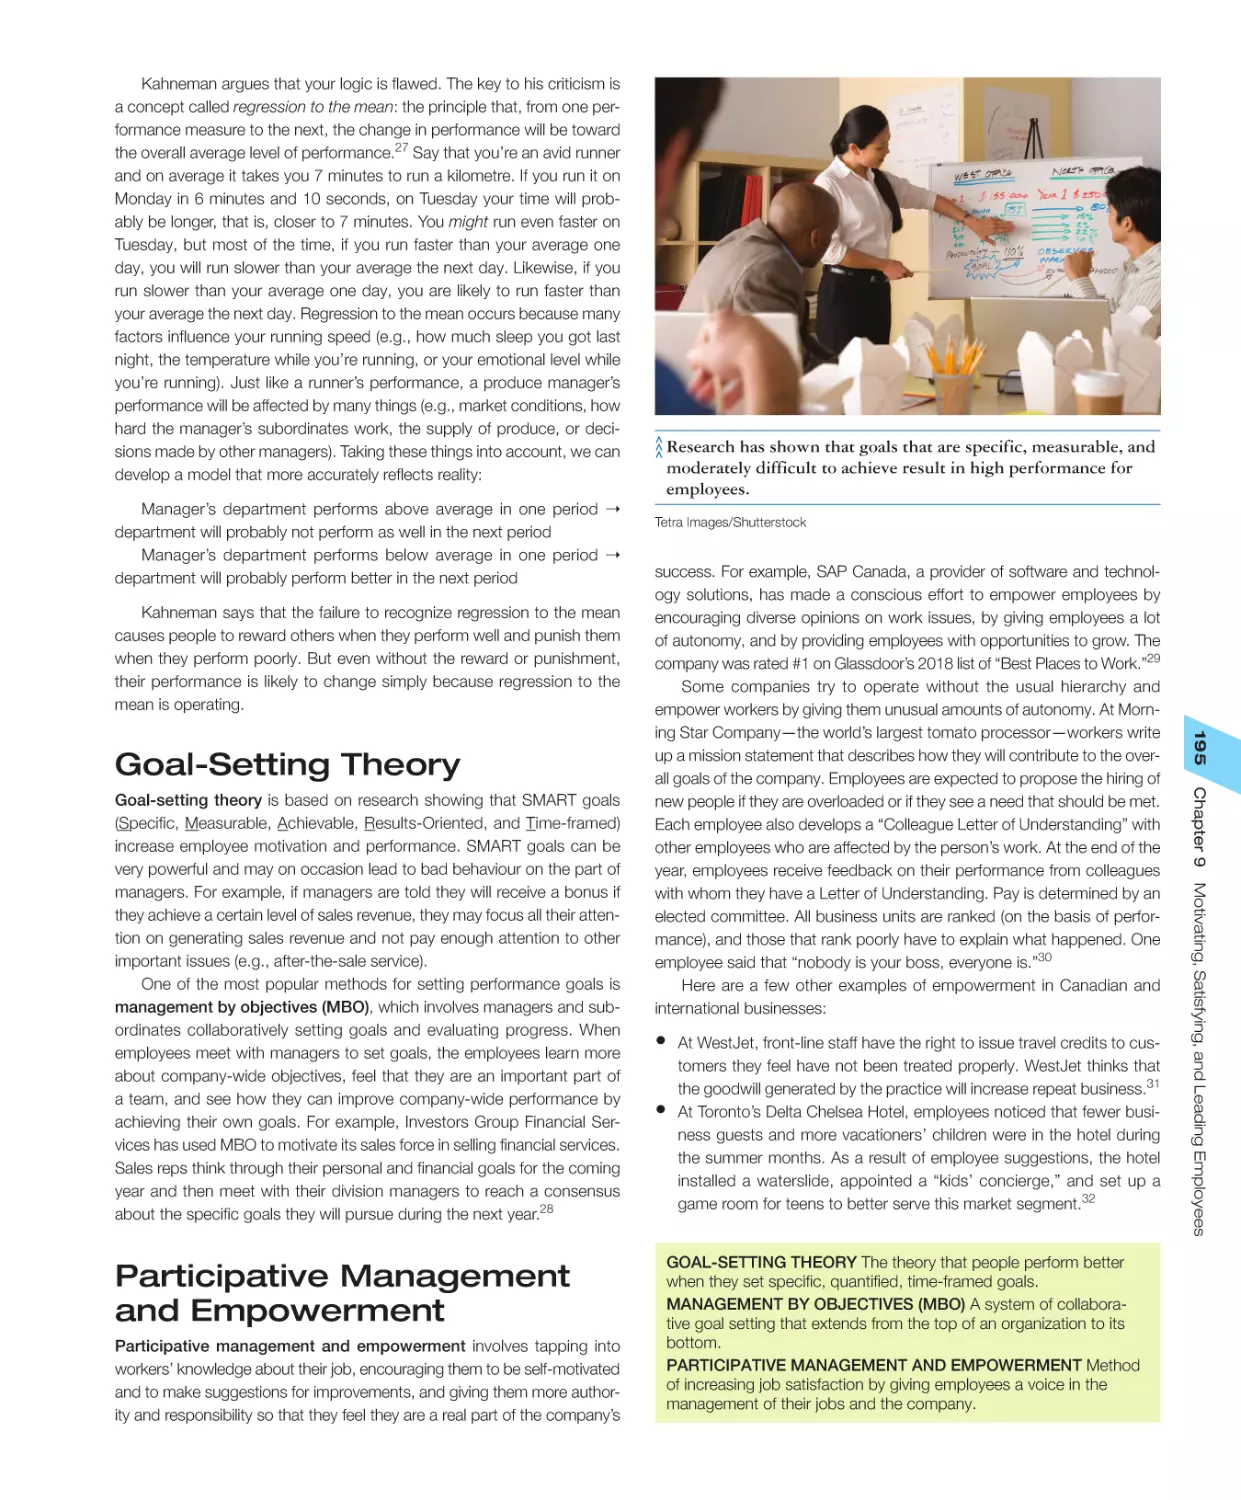 Goal‐Setting Theory
Participative Management and Empowerment